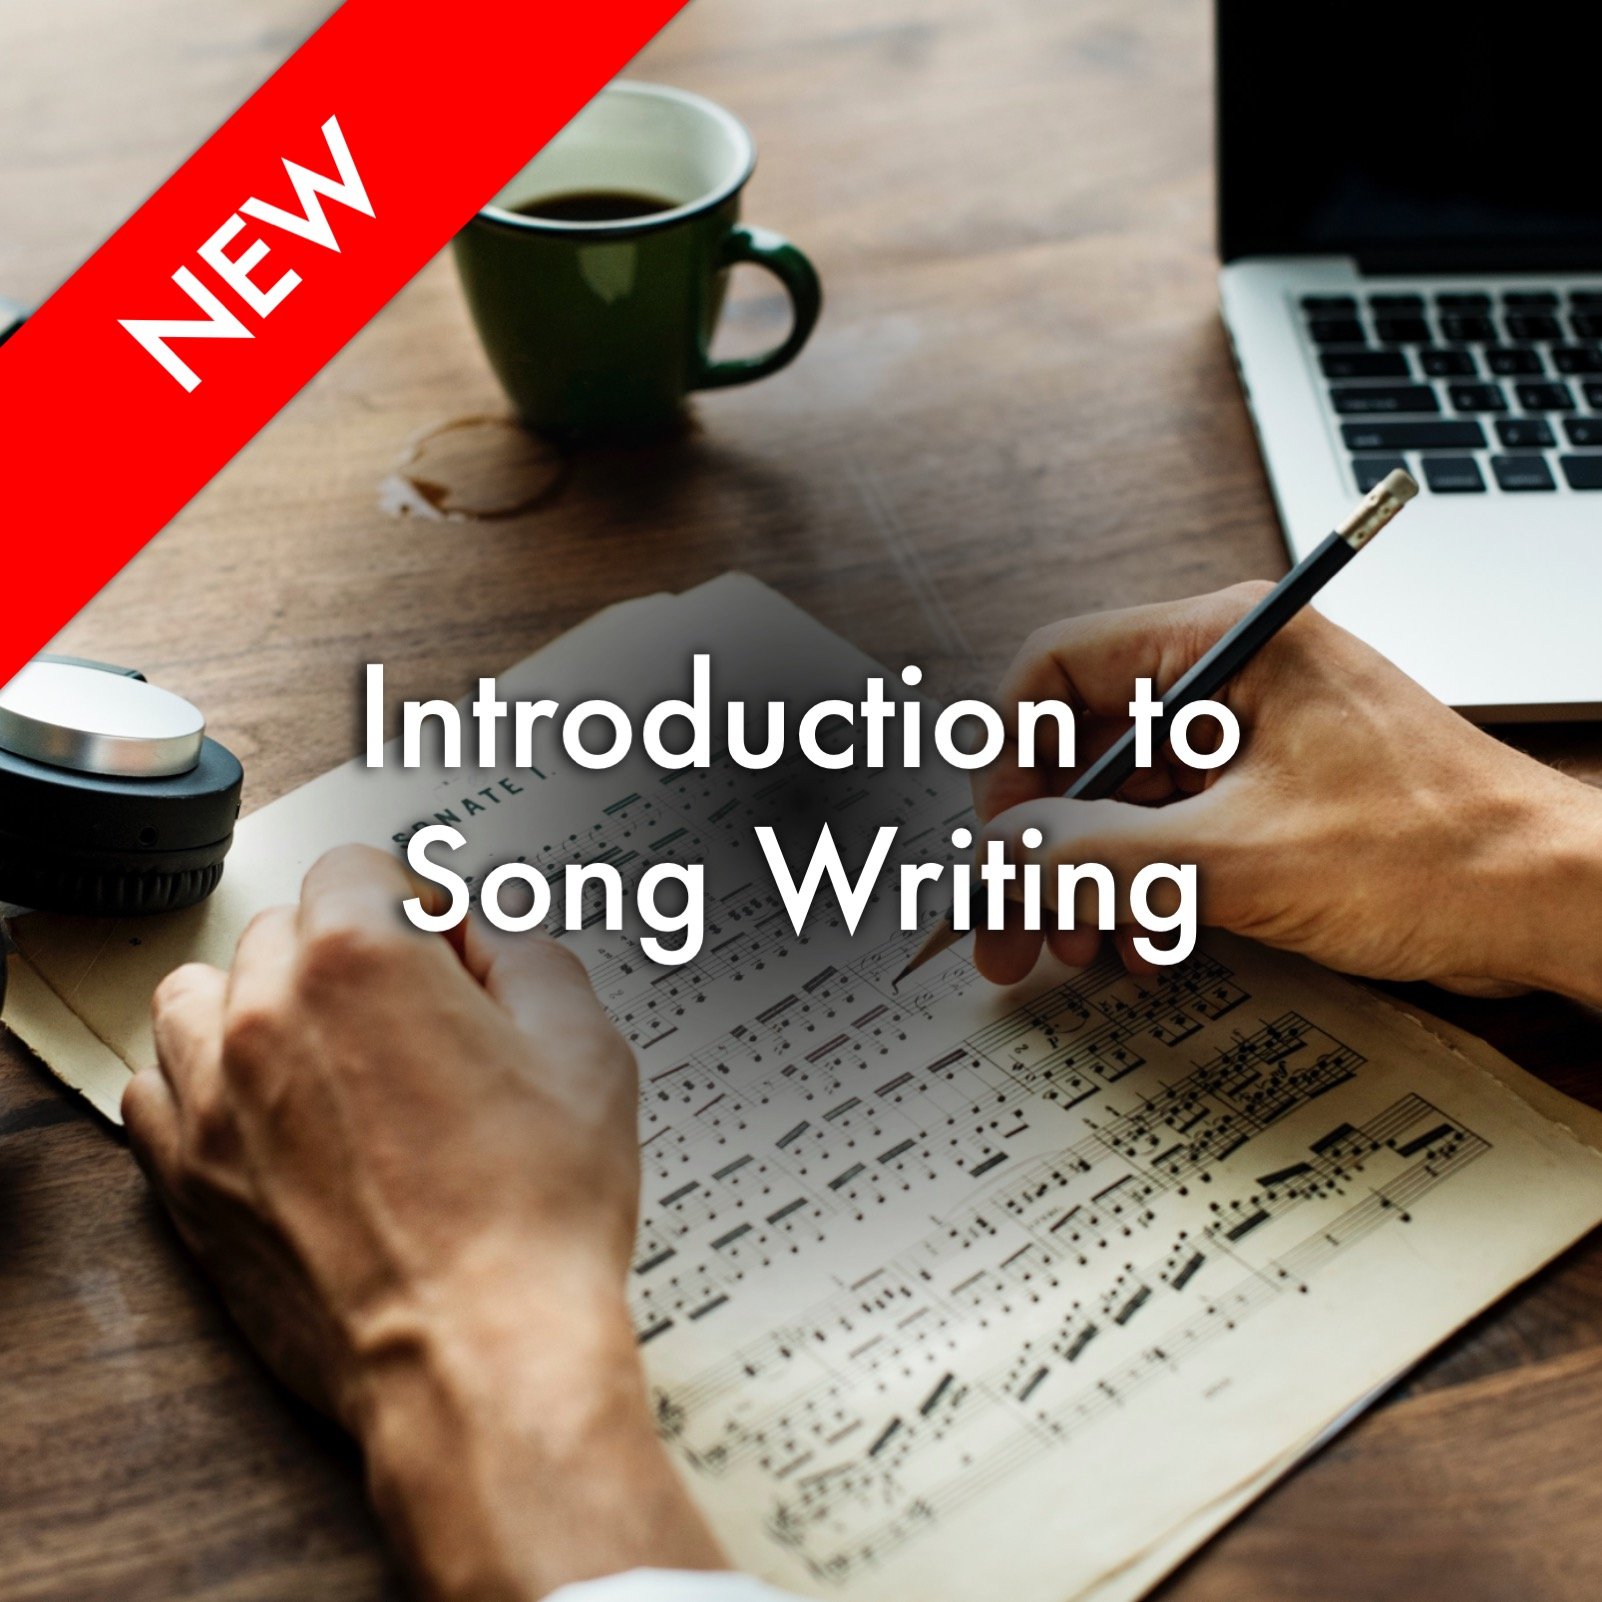 Introduction to Song Writing (new).jpg